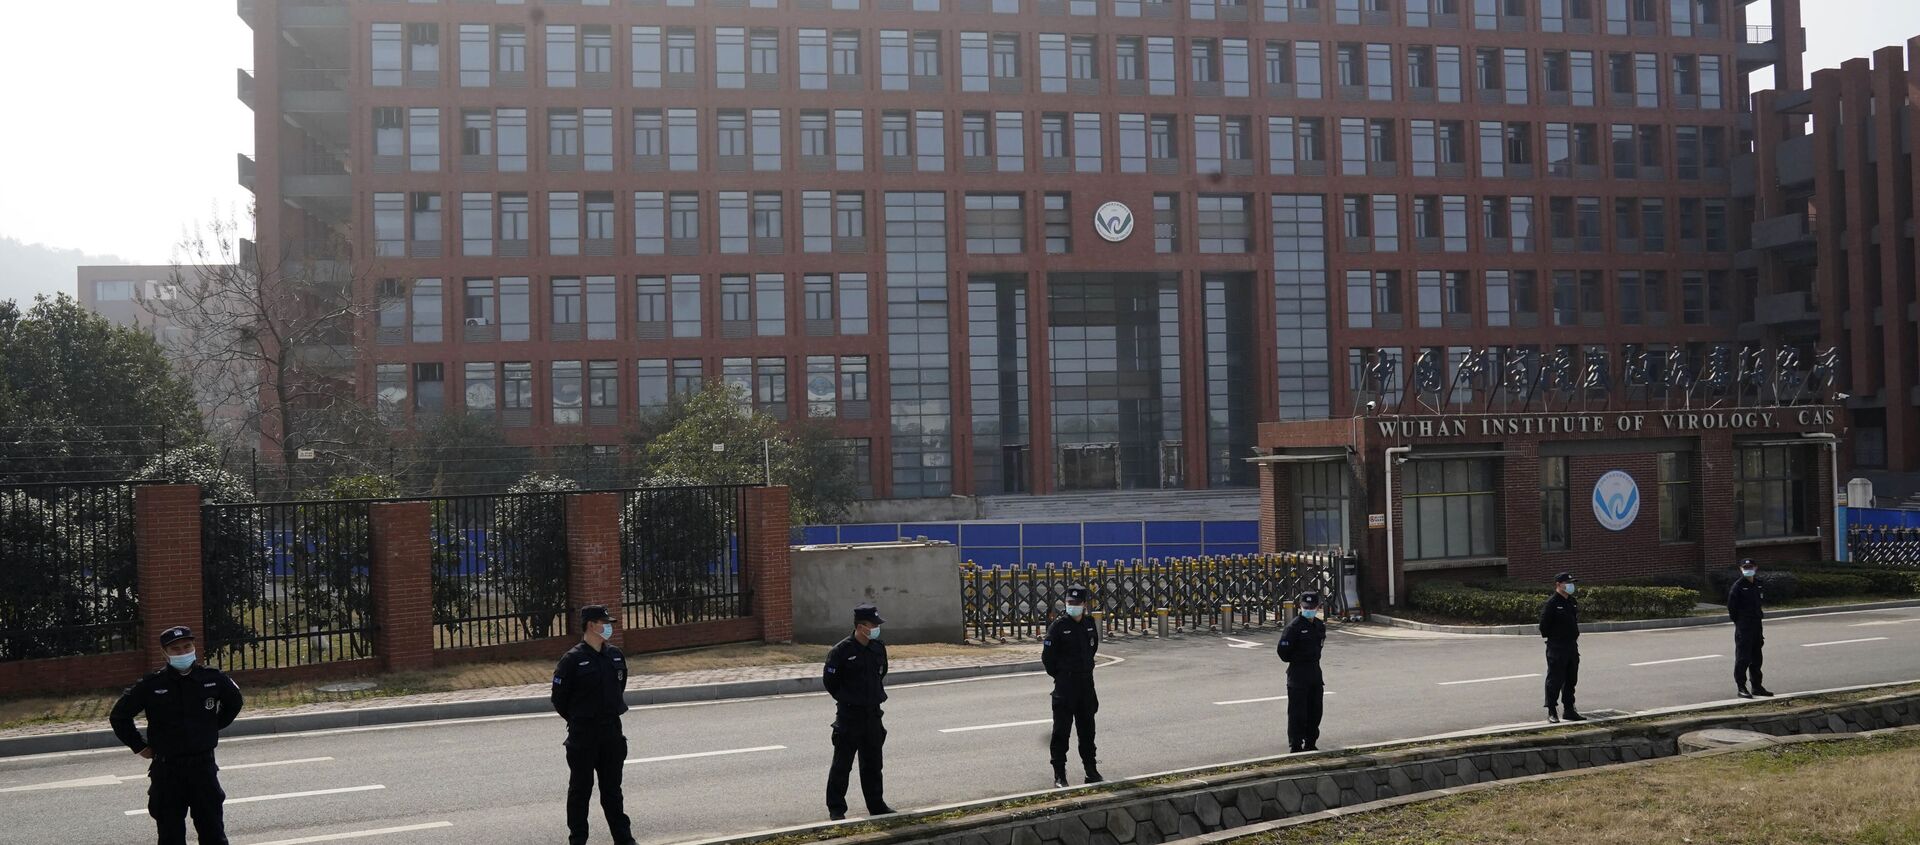 Security personnel gather near the entrance to the Wuhan Institute of Virology during a visit by the World Health Organization team in Wuhan in China's Hubei province on Wednesday, Feb. 3, 2021.  - Sputnik International, 1920